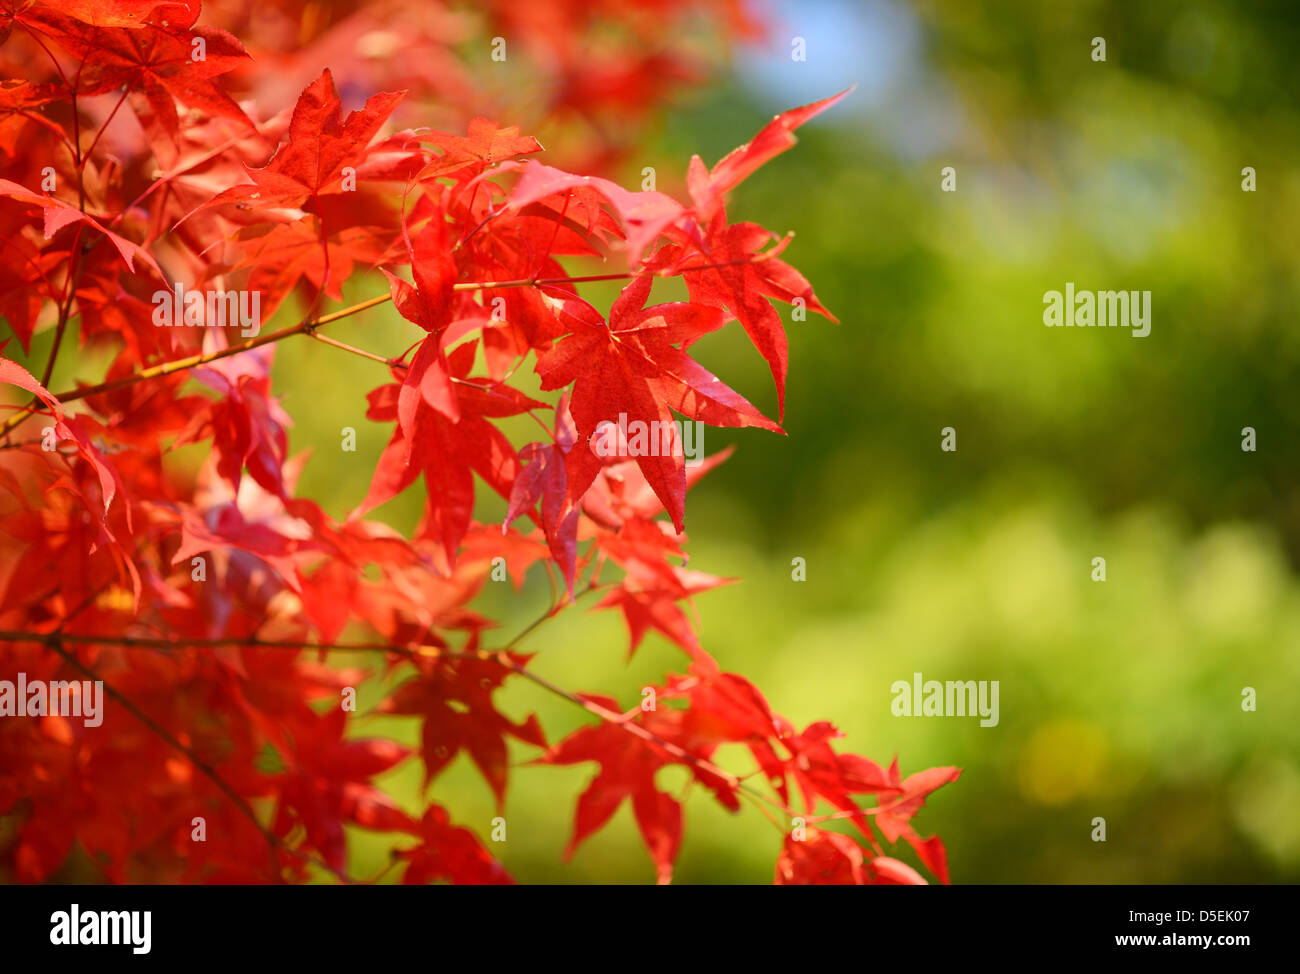 japanese maples in red color Stock Photo